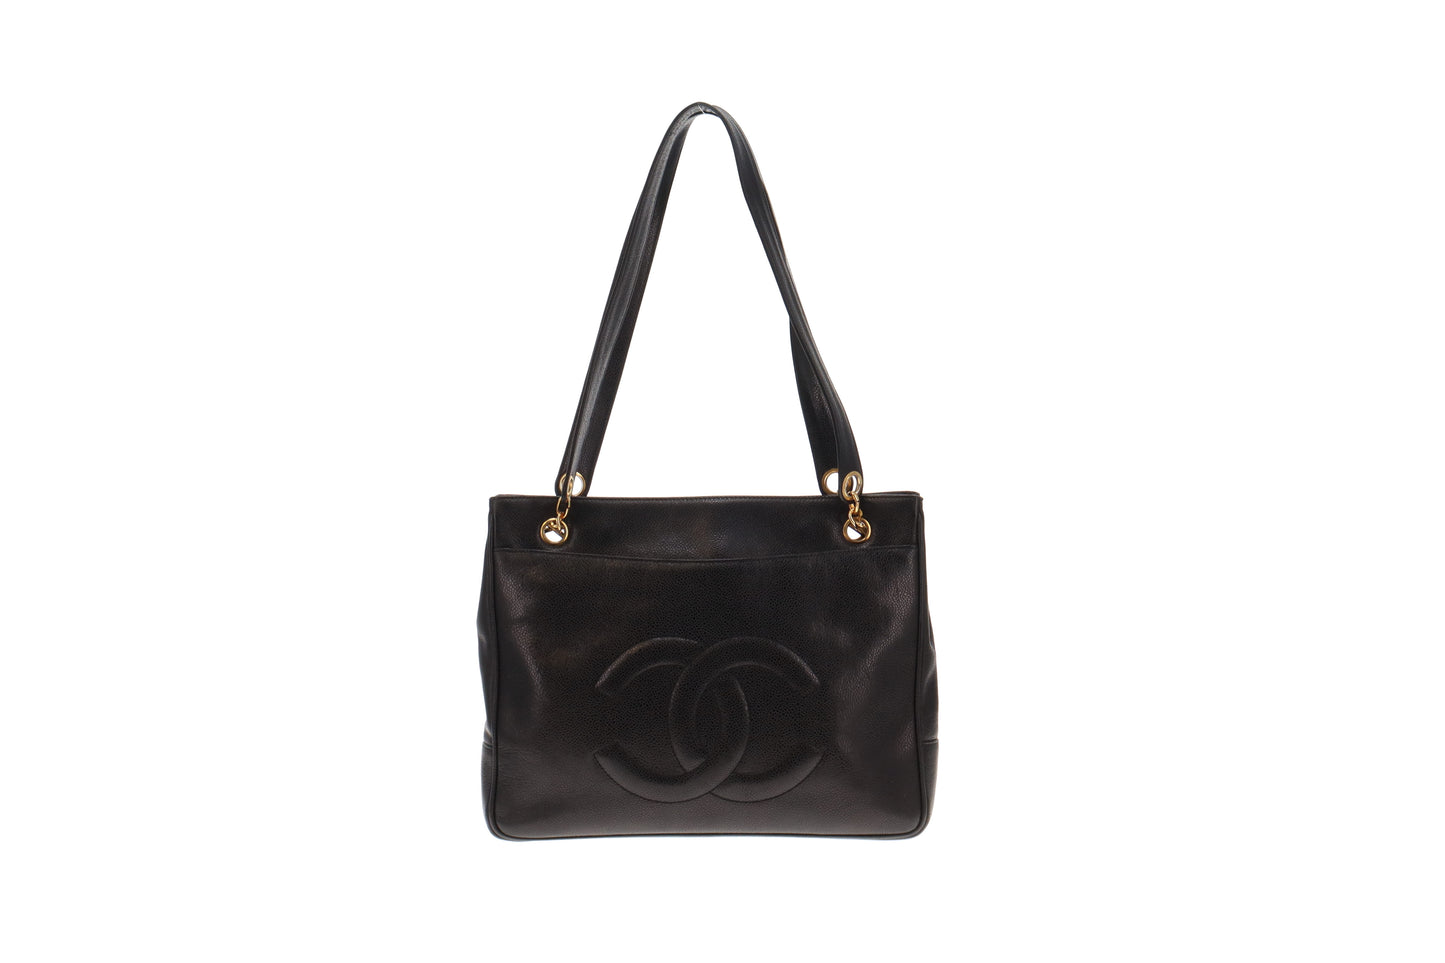 Chanel Vintage Leather Tote